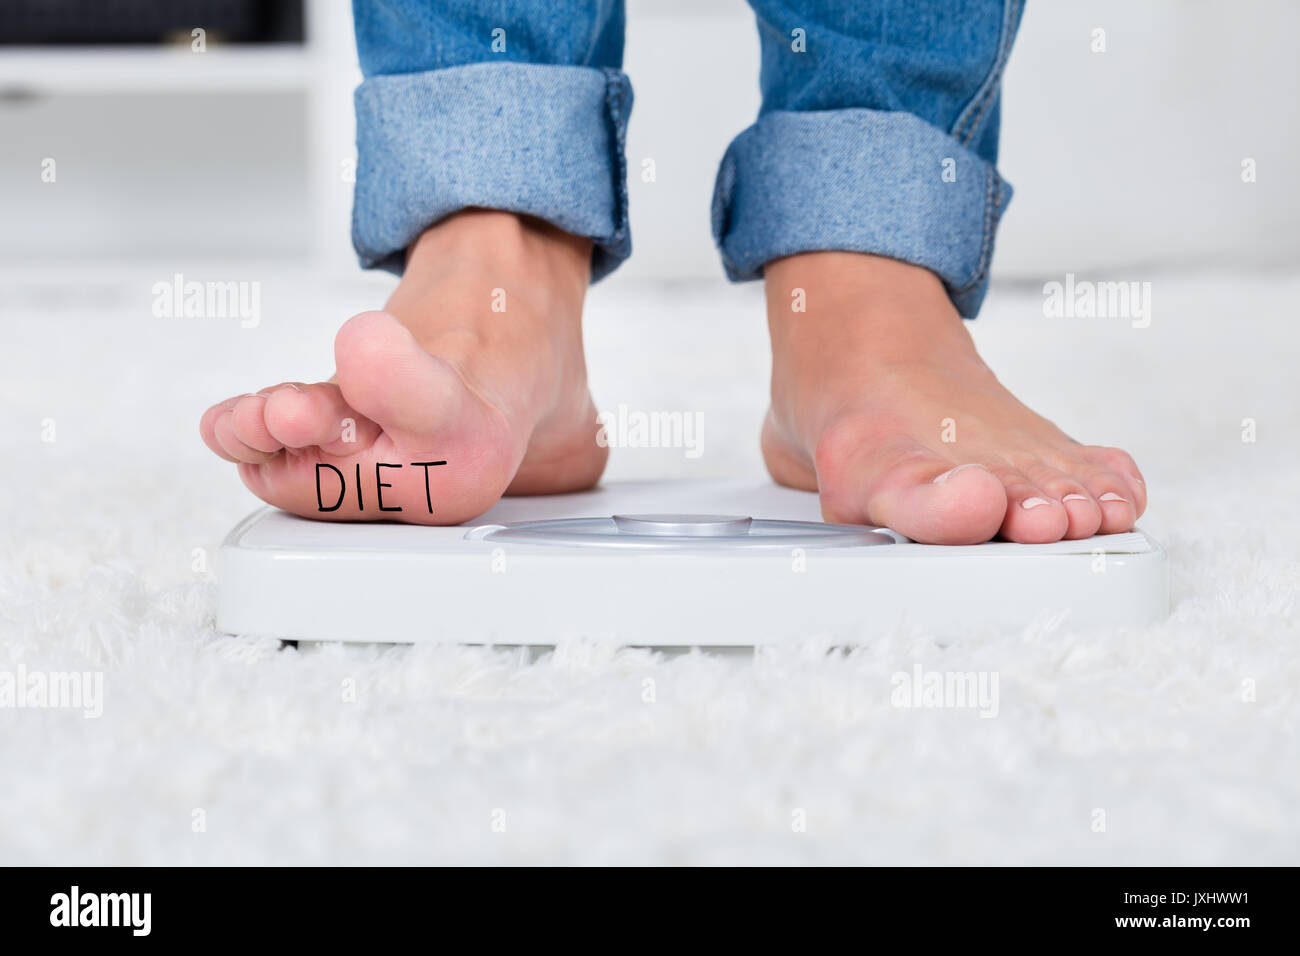 Woman standing on weight scales Stock Photo - Alamy